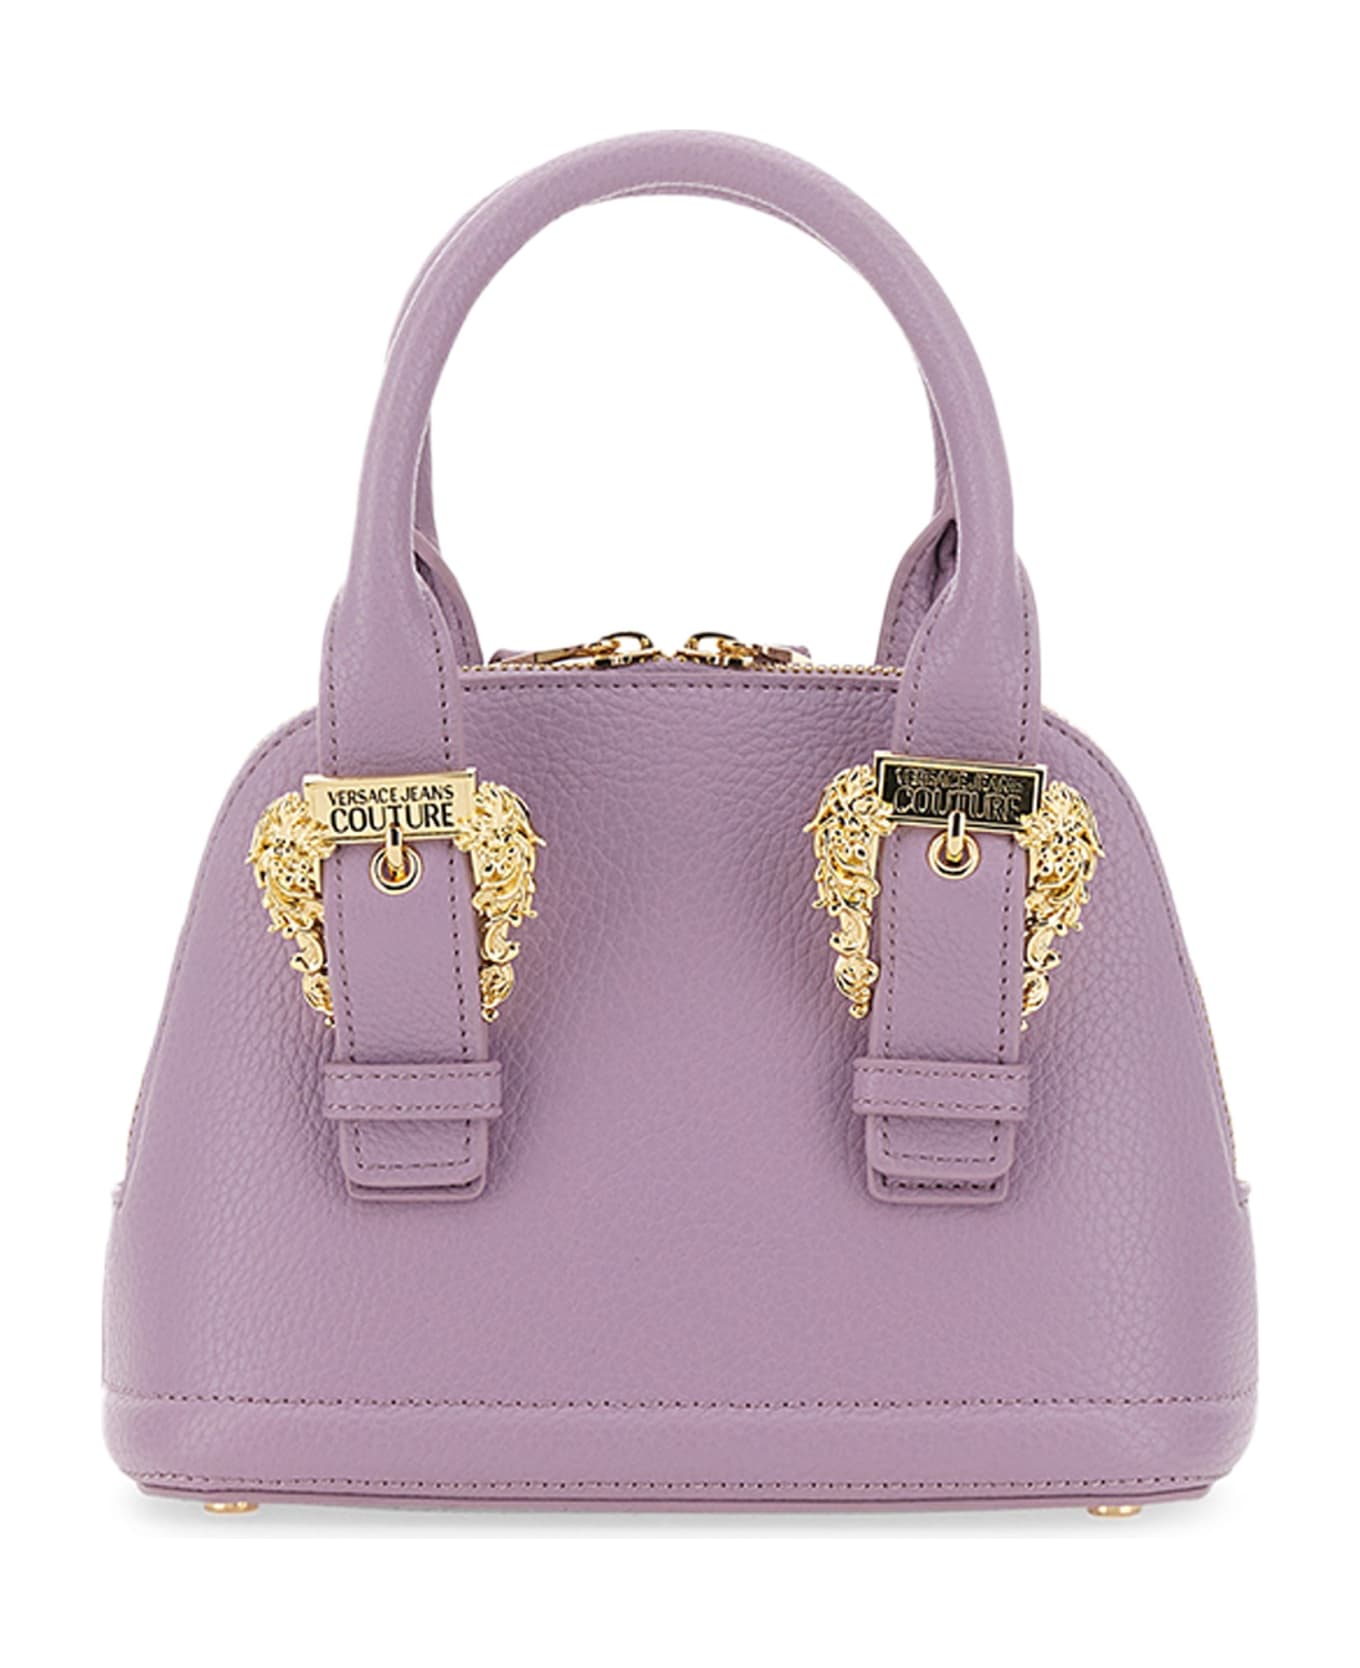 Versace Jeans Couture Bag - LILLA トートバッグ